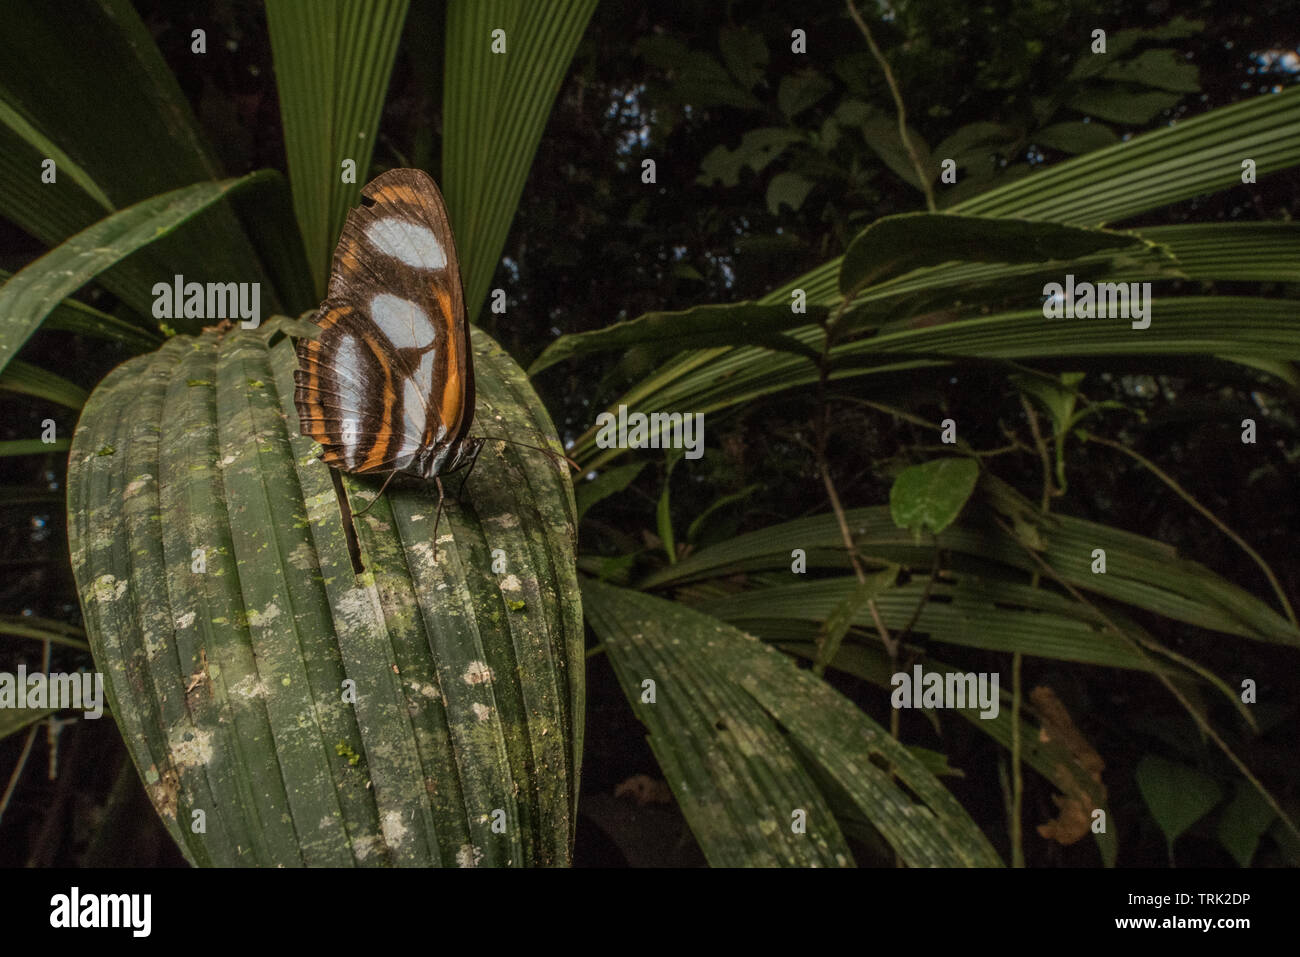 A butterfly perches on some foliage in the Amazon rainforest, the most biodiverse place on the planet. Stock Photo